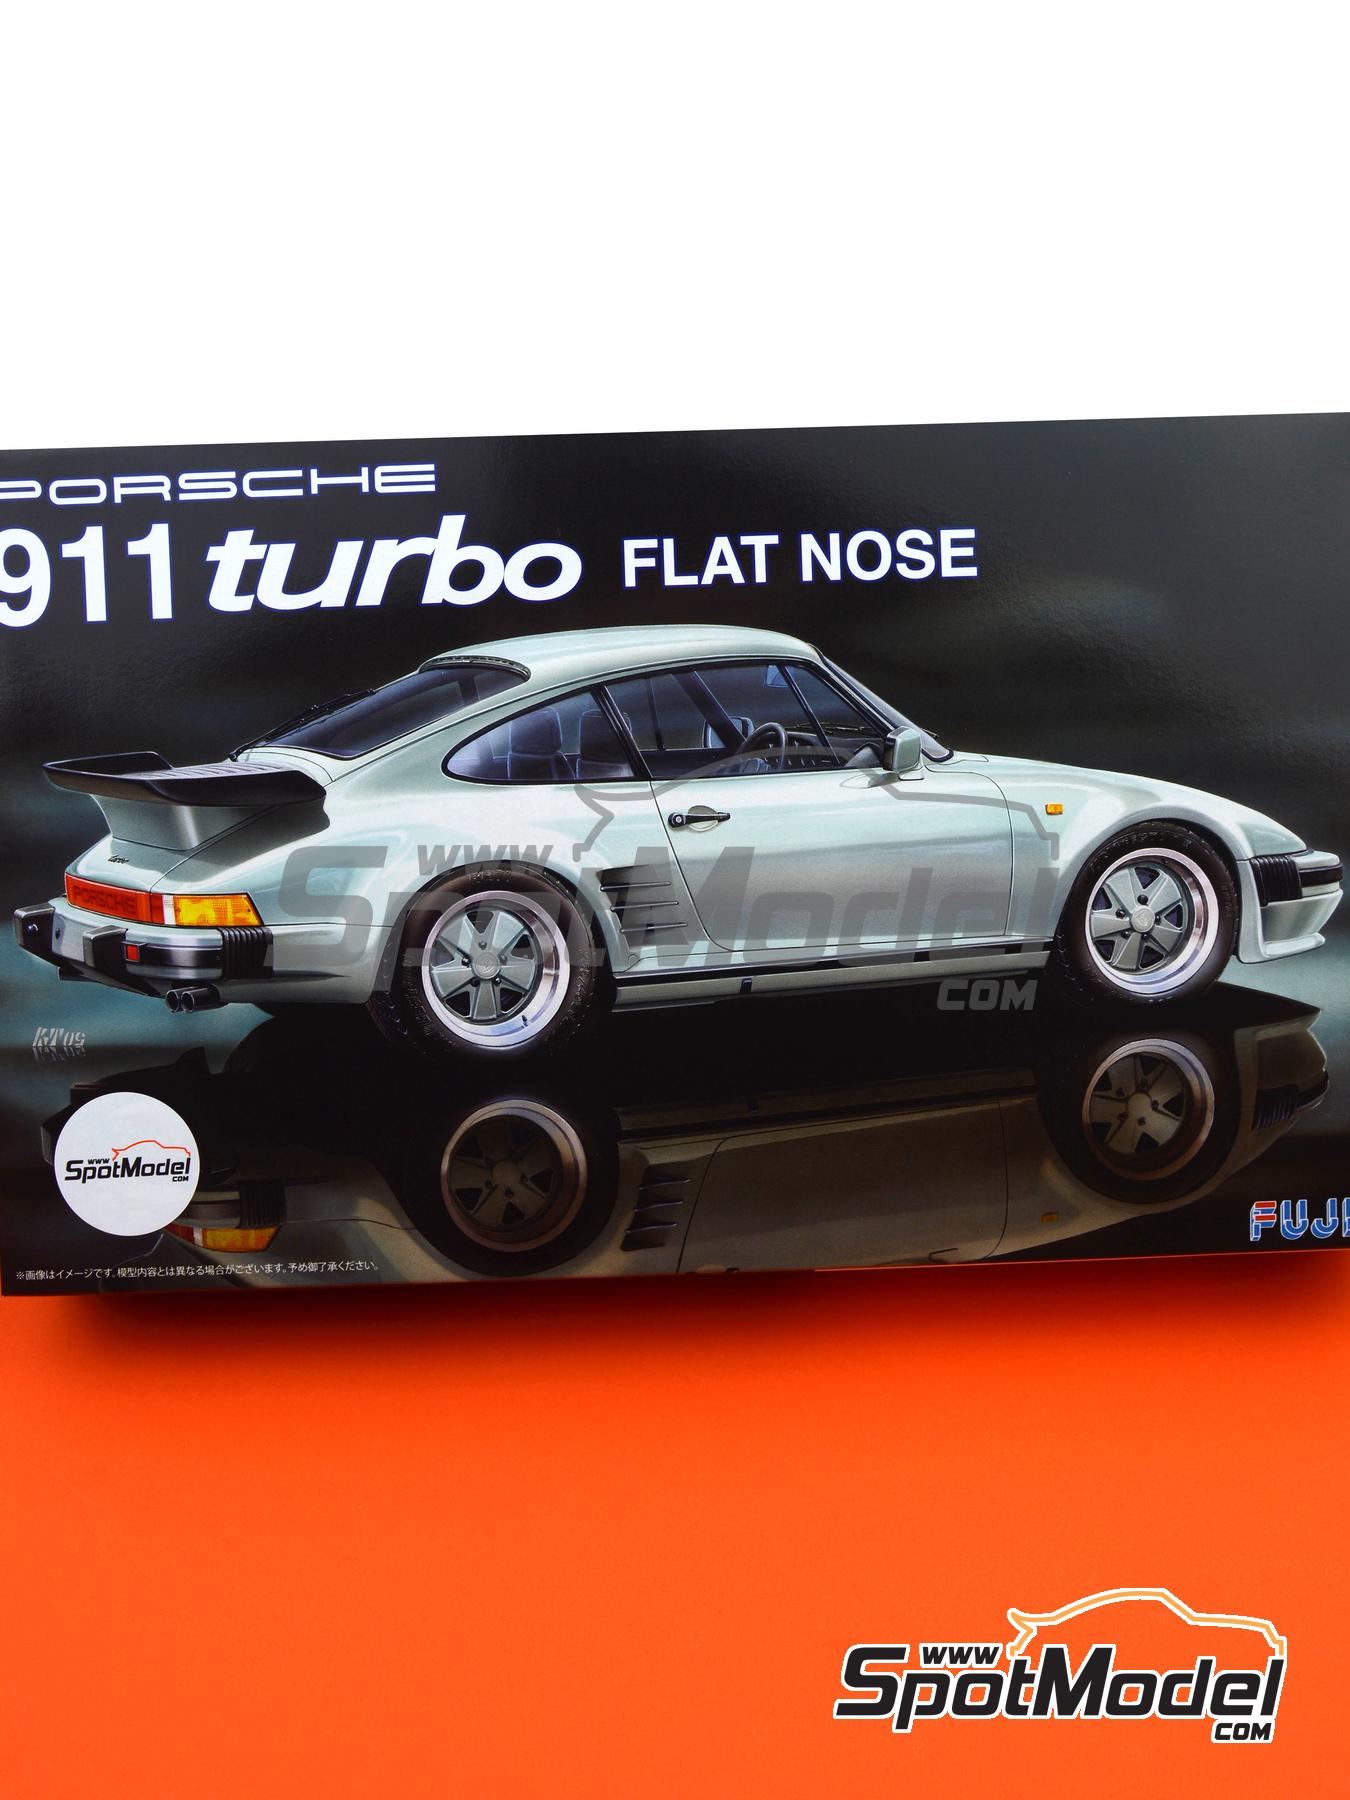 Porsche 911 Turbo Flat Nose. Car scale model kit in 1/24 scale manufactured  by Fujimi (ref. FJ12697, also 4968728126975, 12697, 126975 and RS-41)